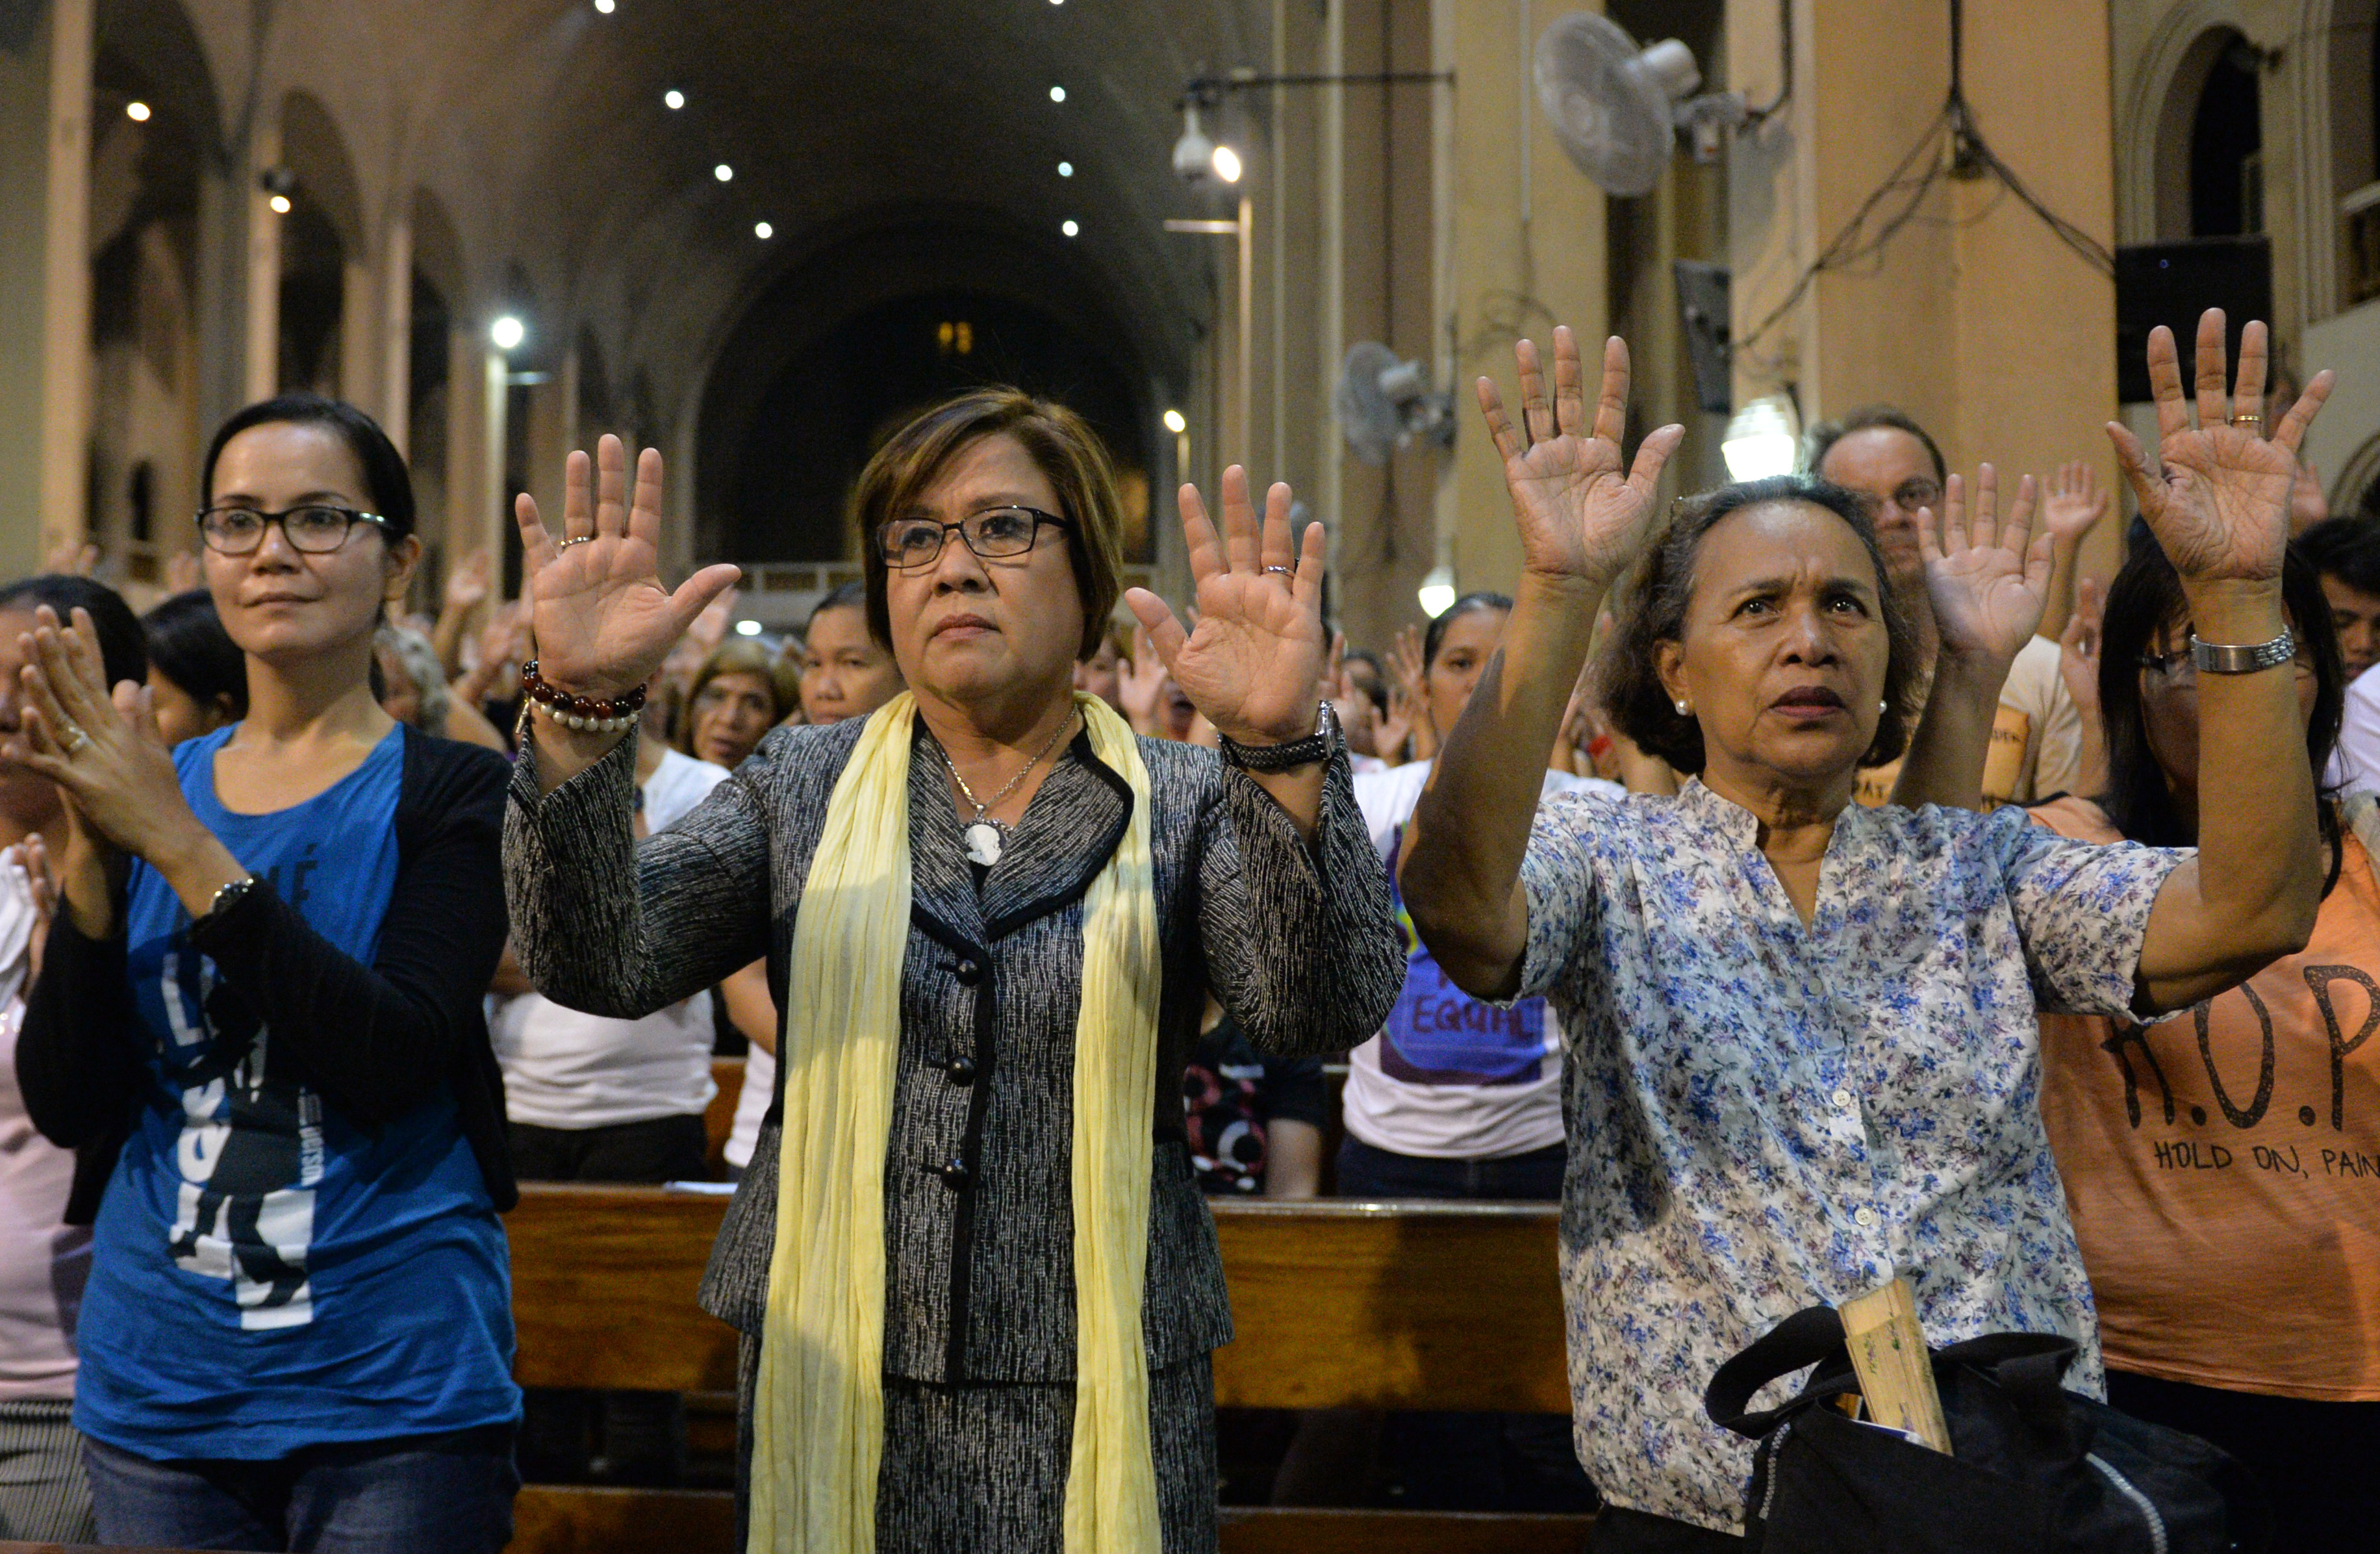 Philippine Senator Leila de Lima, center, gestures along with Catholic faithful, as they offer prayers during a mass for all the victims of the Philippine drug war, at a church in Manila on Nov. 23, 2016 (Ted Aljibe—AFP/Getty Images)